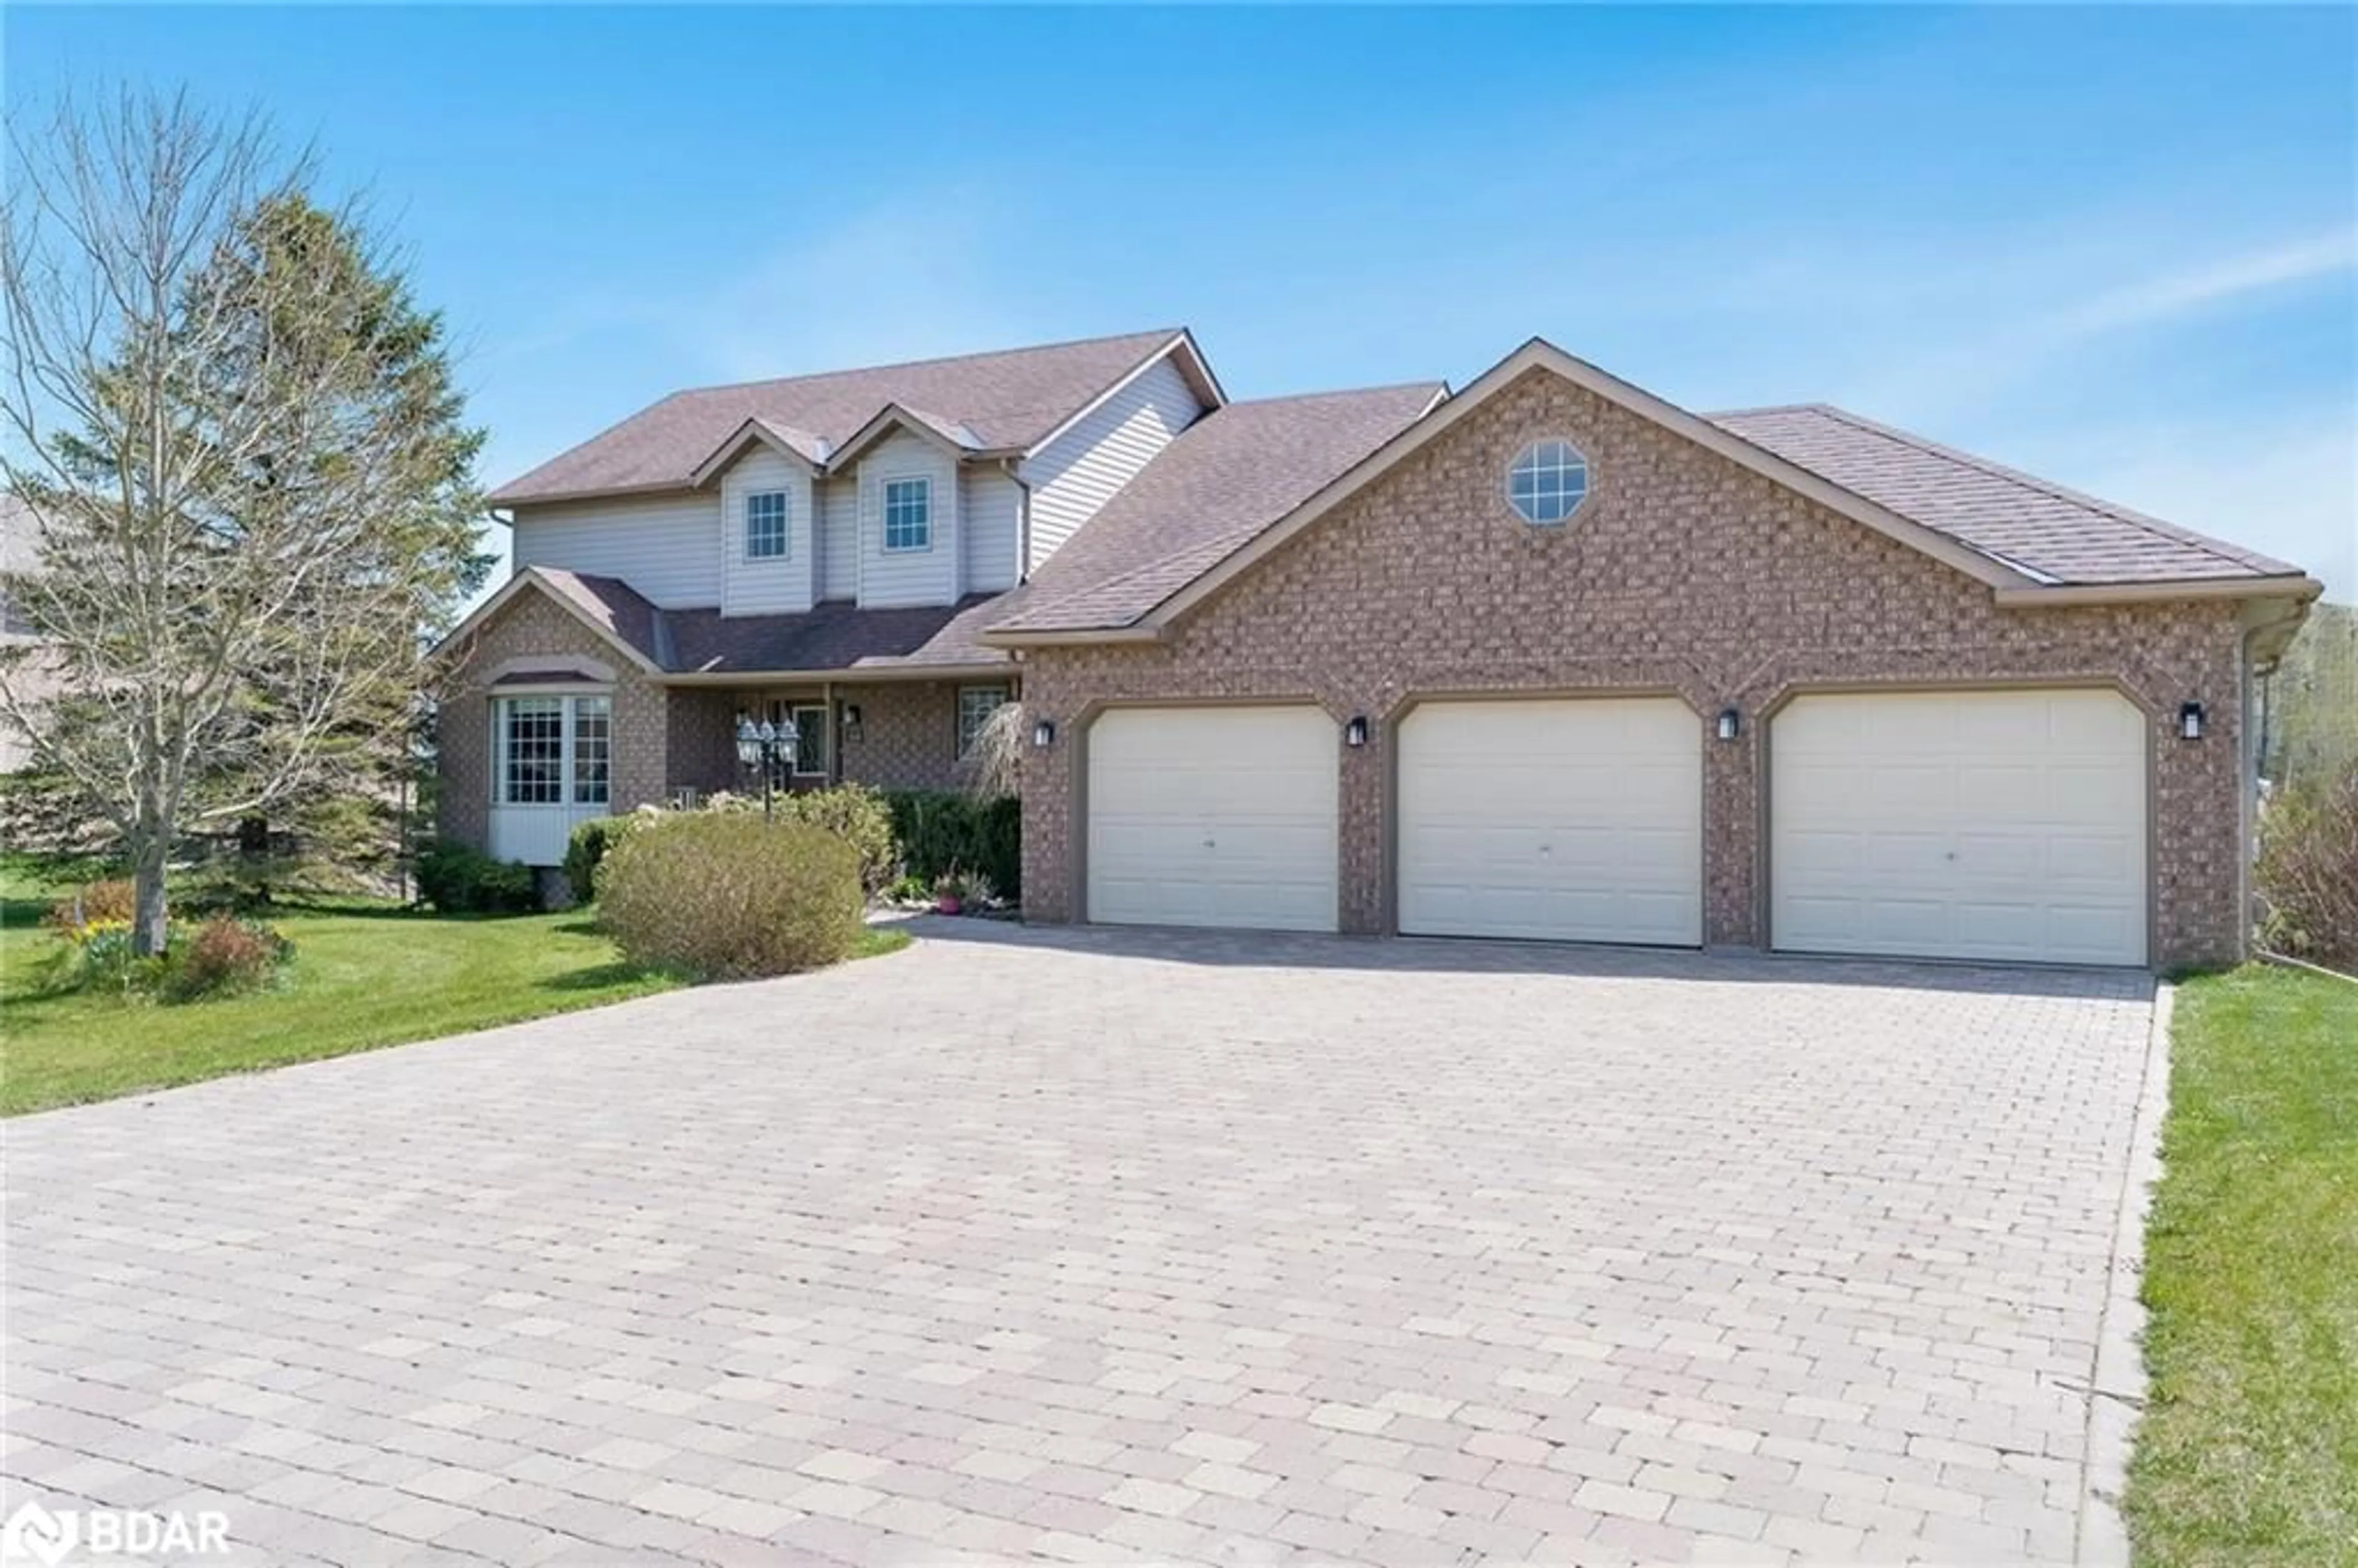 Home with brick exterior material for 36 Marlow Cir, Springwater Ontario L0L 1V0